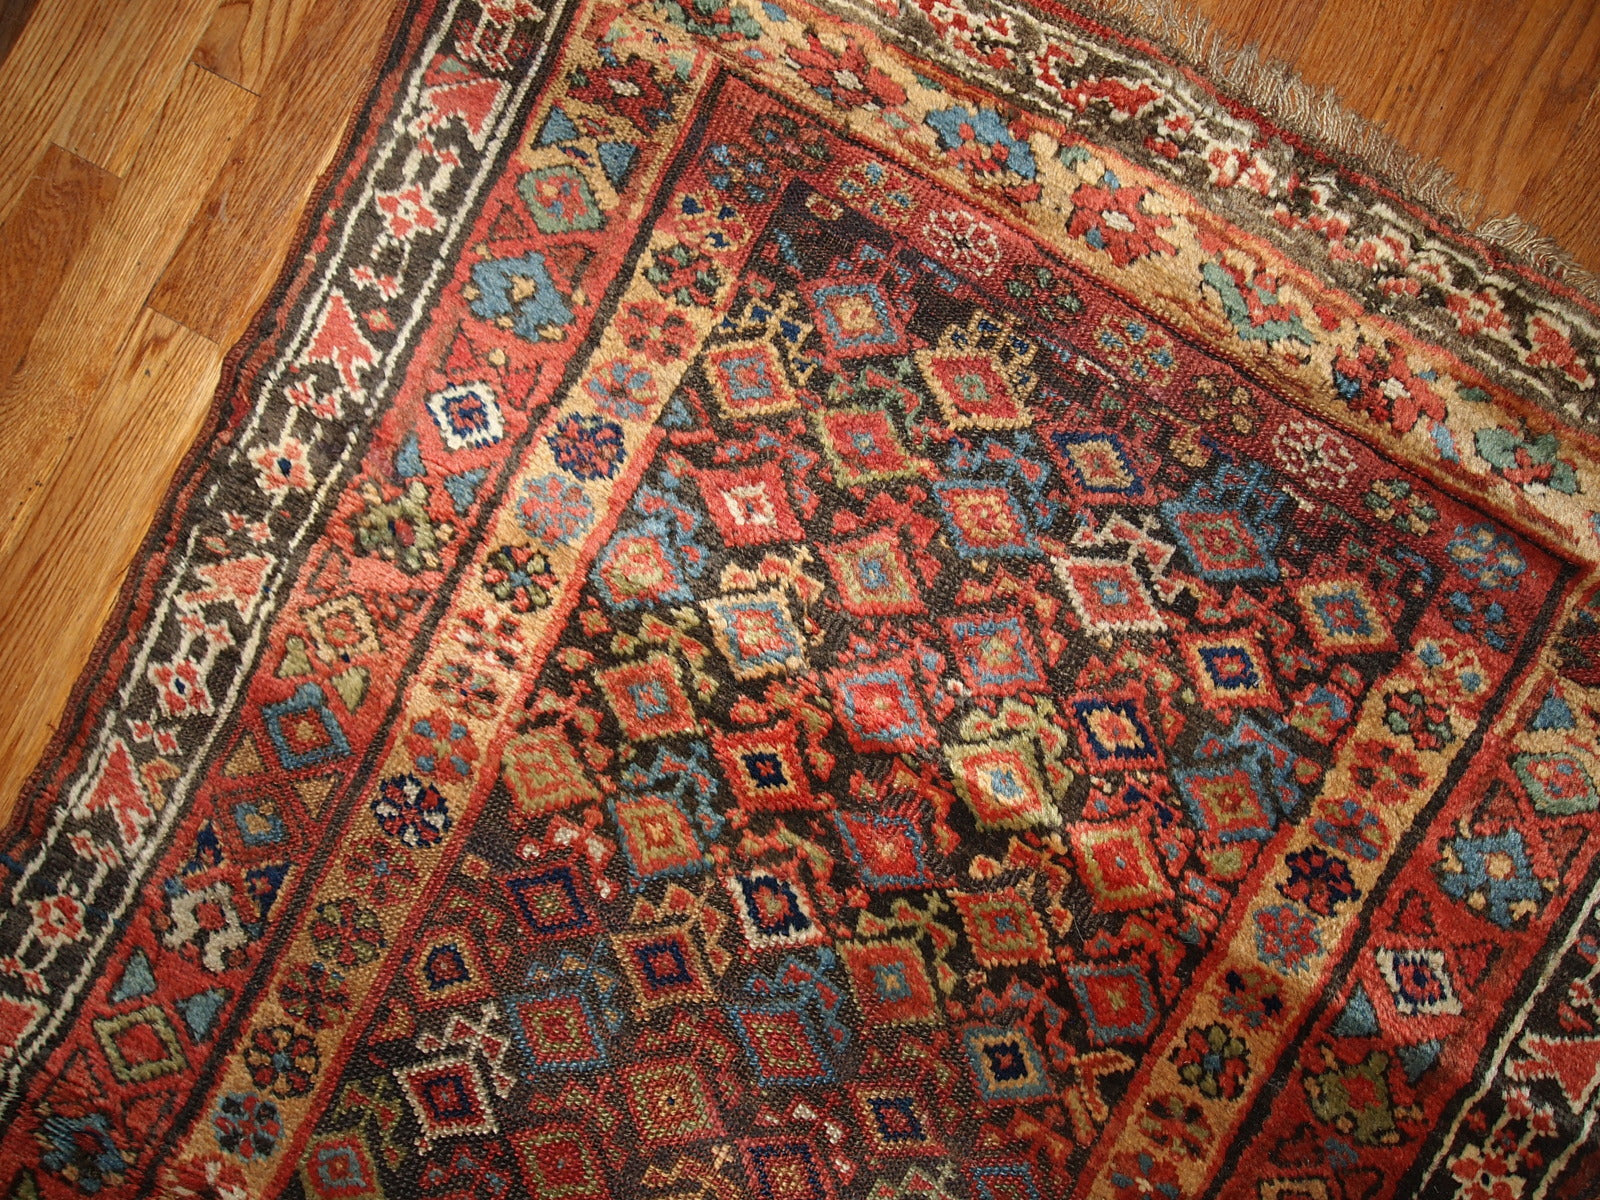 Antique hand made Kurdish runner in traditional Persian geometric design all over the chocolate brown field. The rug is from the end of 19th century in original good condition.